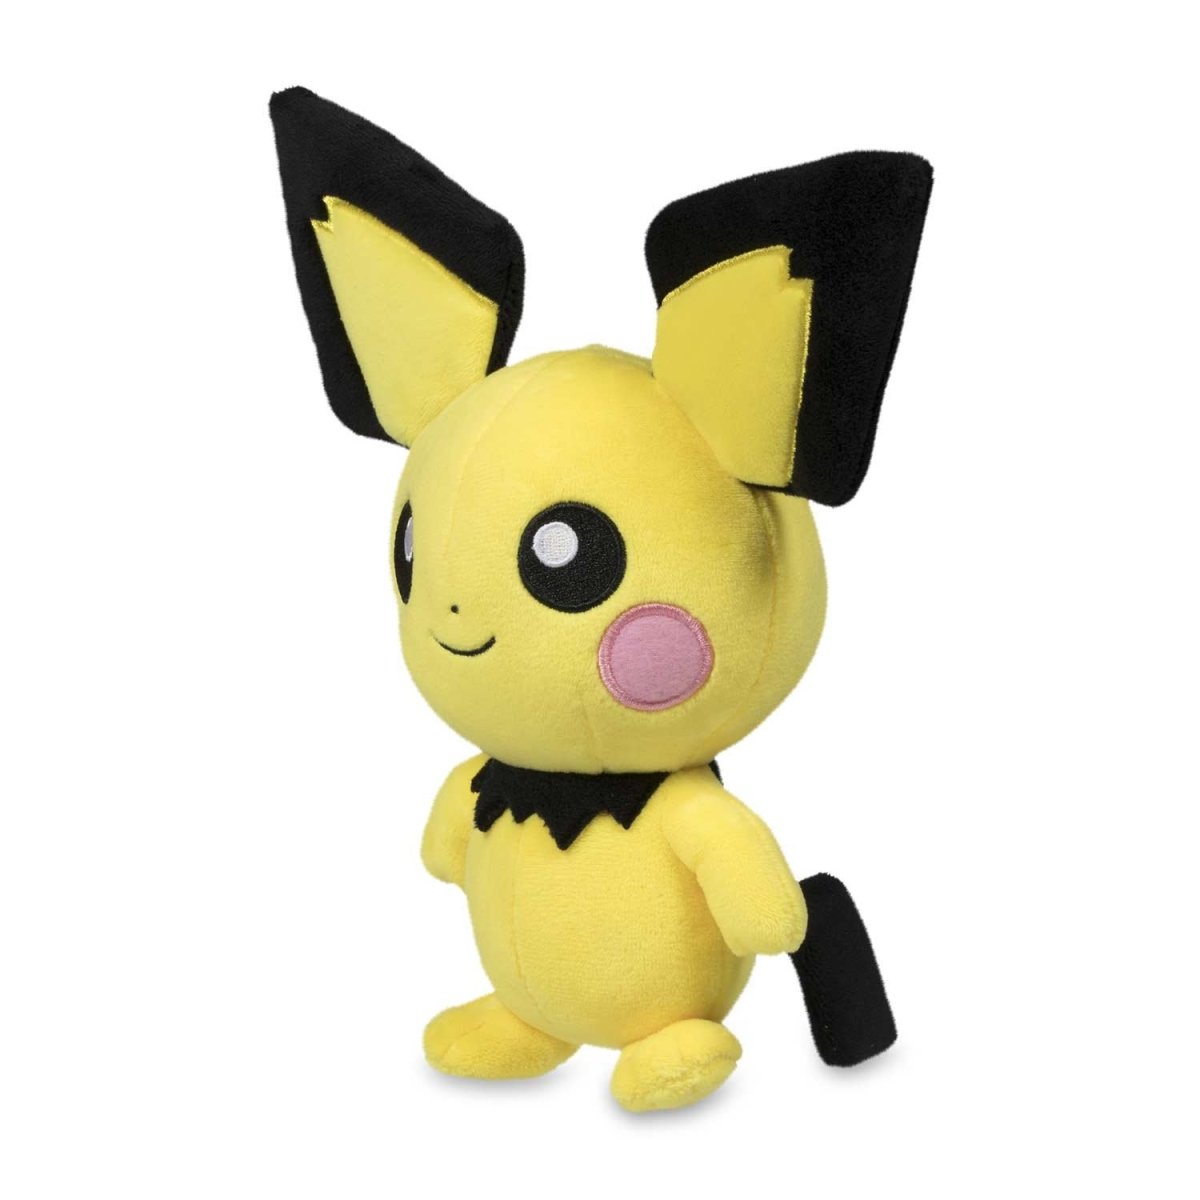 Incredible Compilation: Over 999 Pichu Images in Full 4K Resolution